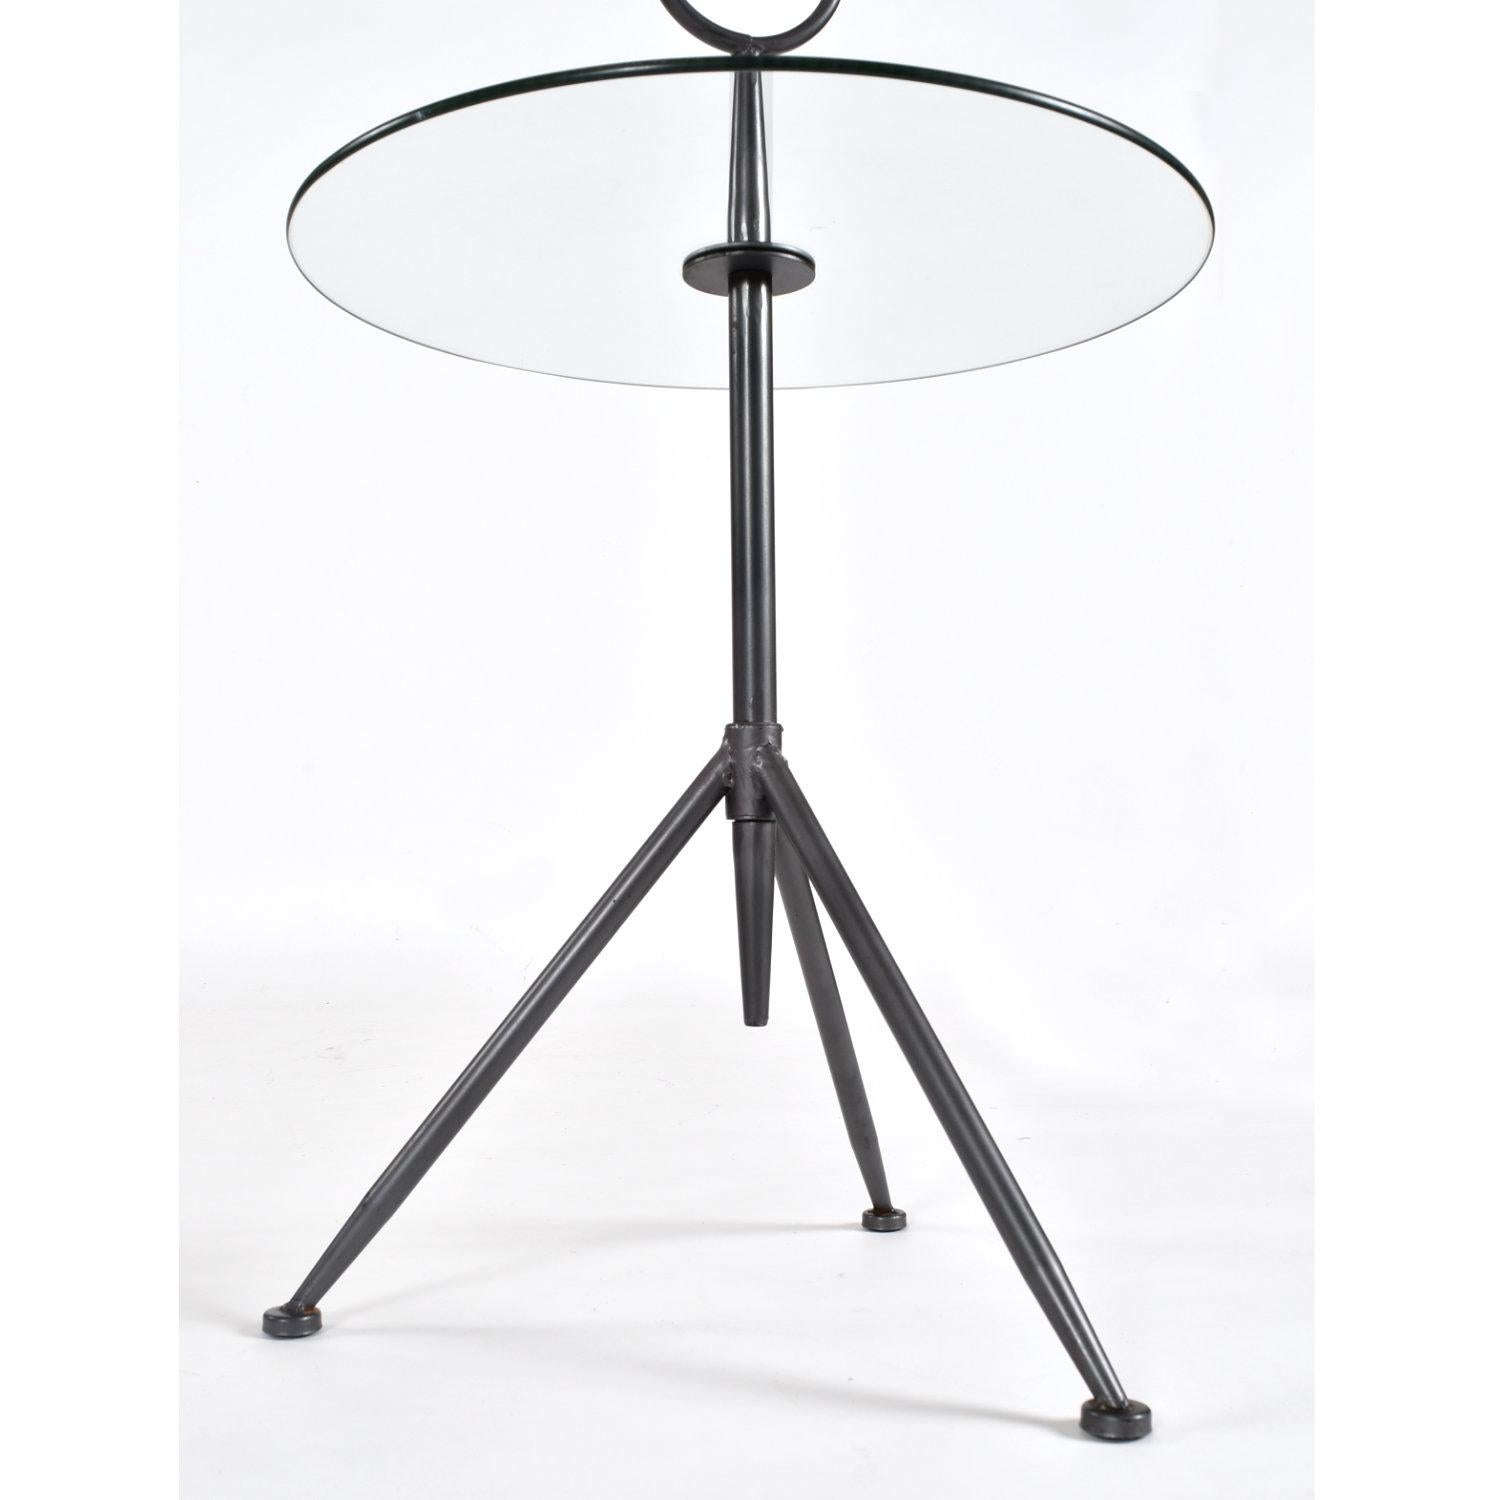 Pair of Italian Modern Round Glass Gueridon Side Tables with Tripod Steel Bases For Sale 4